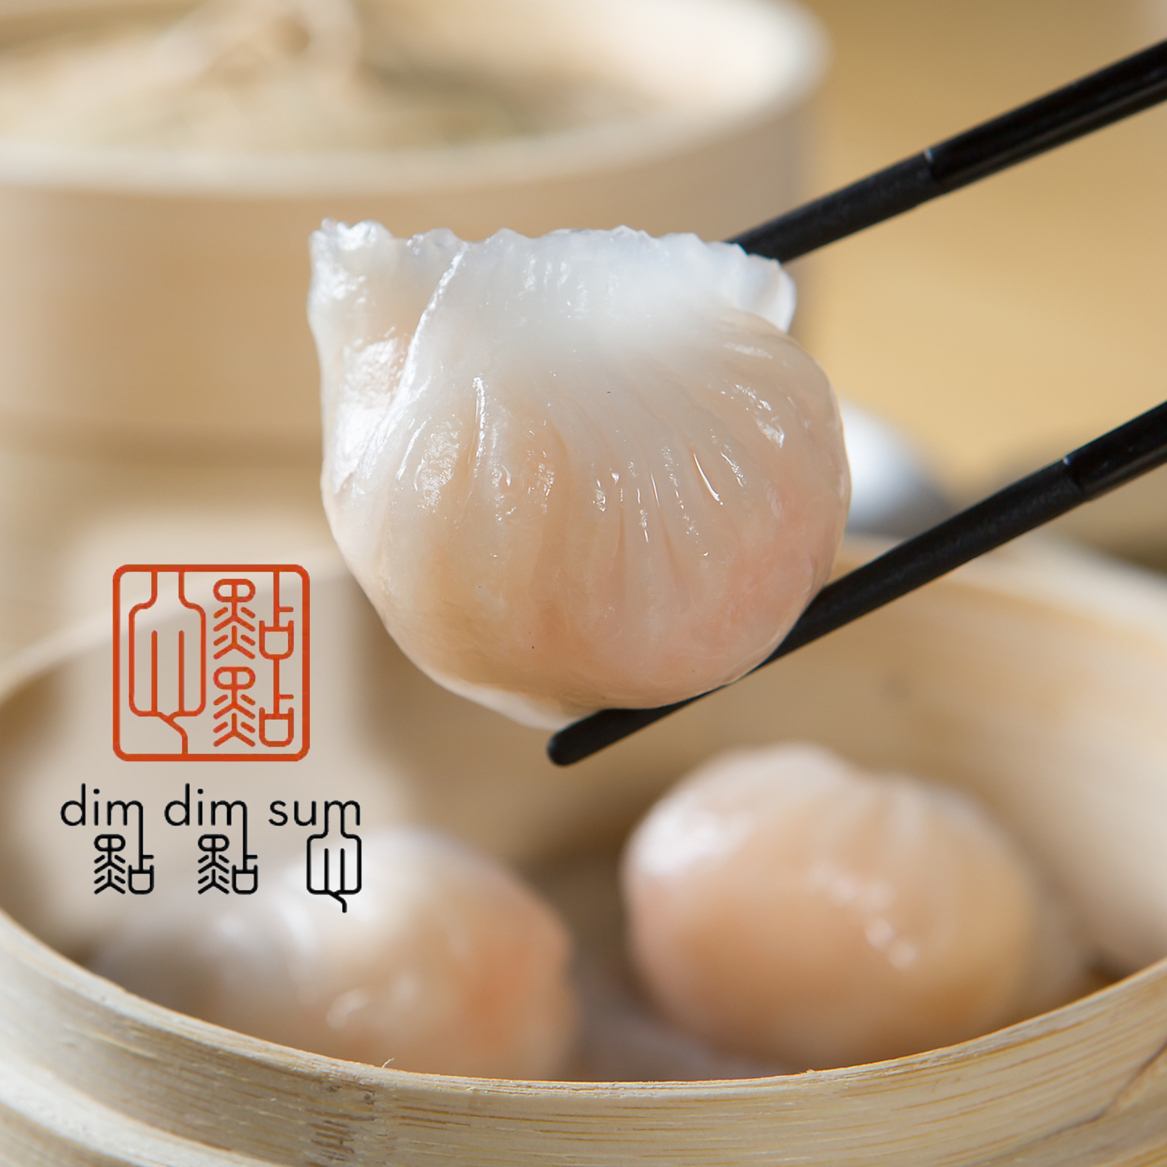 The extremely popular dim sum restaurant that has long lines in Hong Kong, Taiwan, and South Korea has arrived in Japan for the first time! Savor the authentic taste!